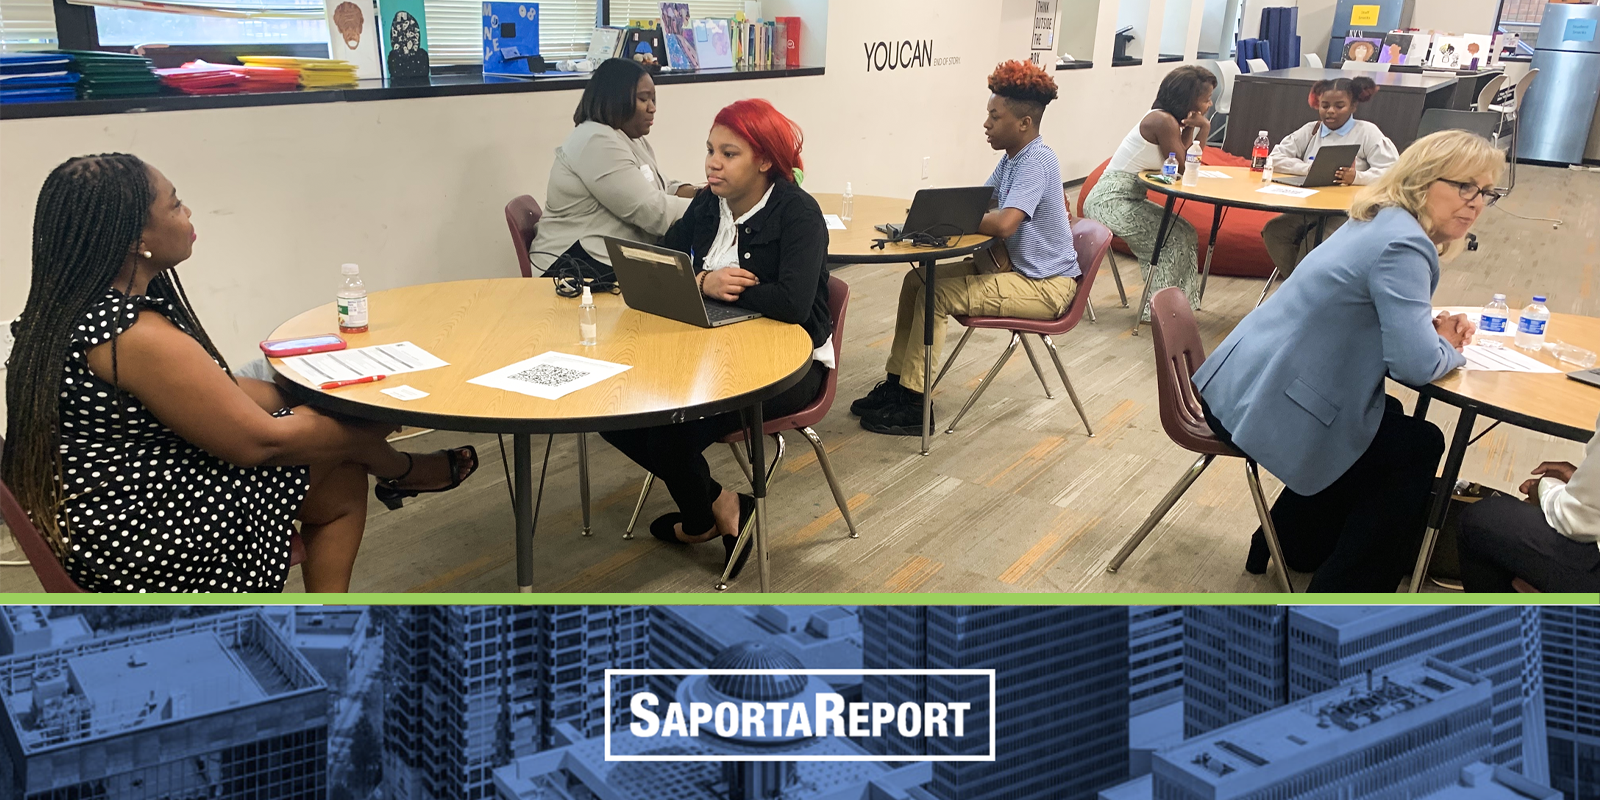 We’re very excited to be featured this month on <strong>SaportaReport,</strong> an Atlanta-based news site devoted to civic journalism. SaportaReport explores Atlanta’s most pressing issues and provides nonprofits and thought leaders with a platform to share their message. <br><br>We’re pleased to have this opportunity to share some of RE’s impact, and to offer insight about how, as a community, we can better serve our marginalized youth. <br><br><strong>Please check out the article here.</strong>